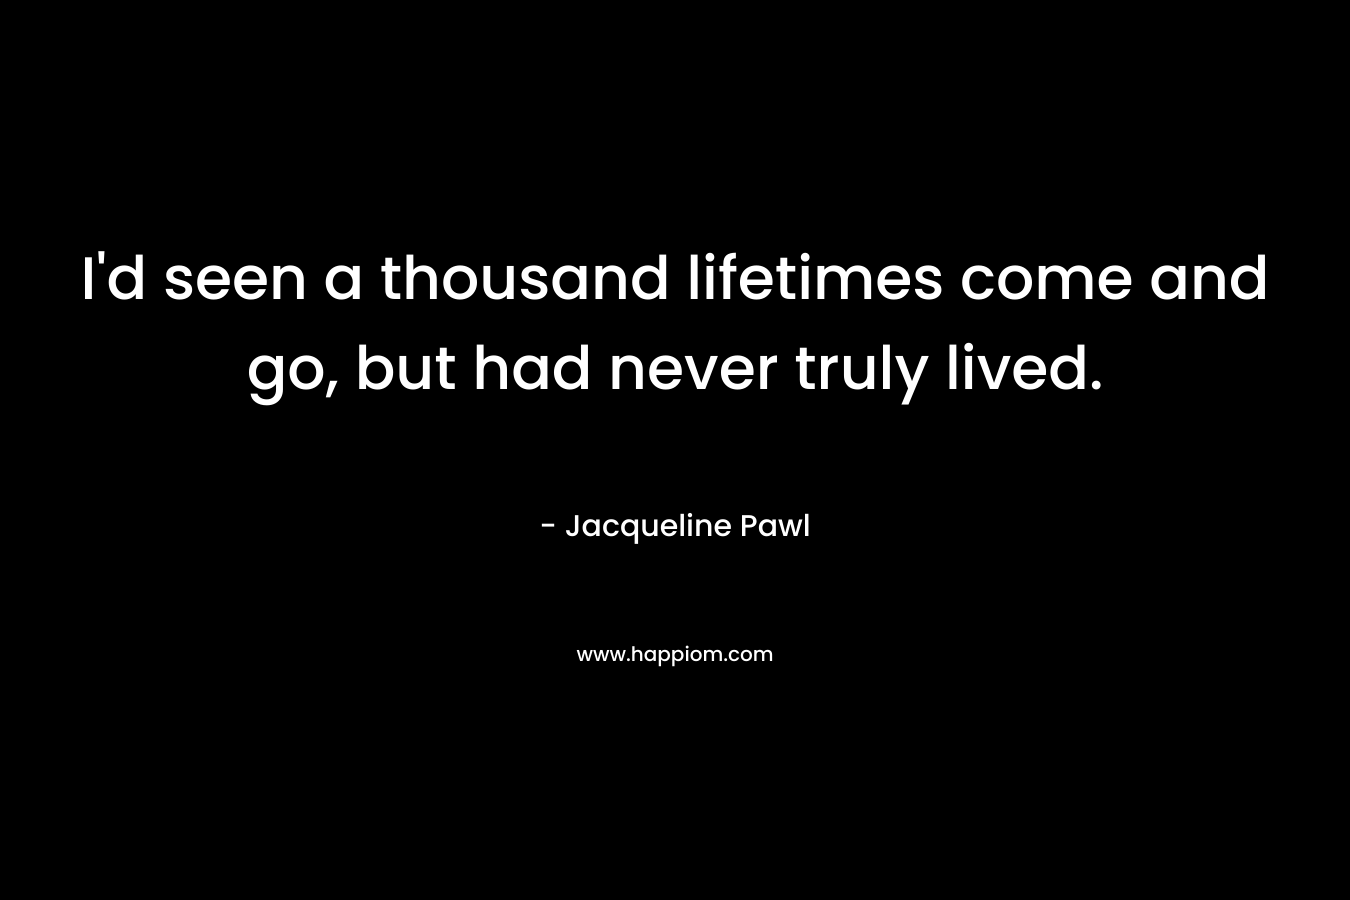 I'd seen a thousand lifetimes come and go, but had never truly lived.